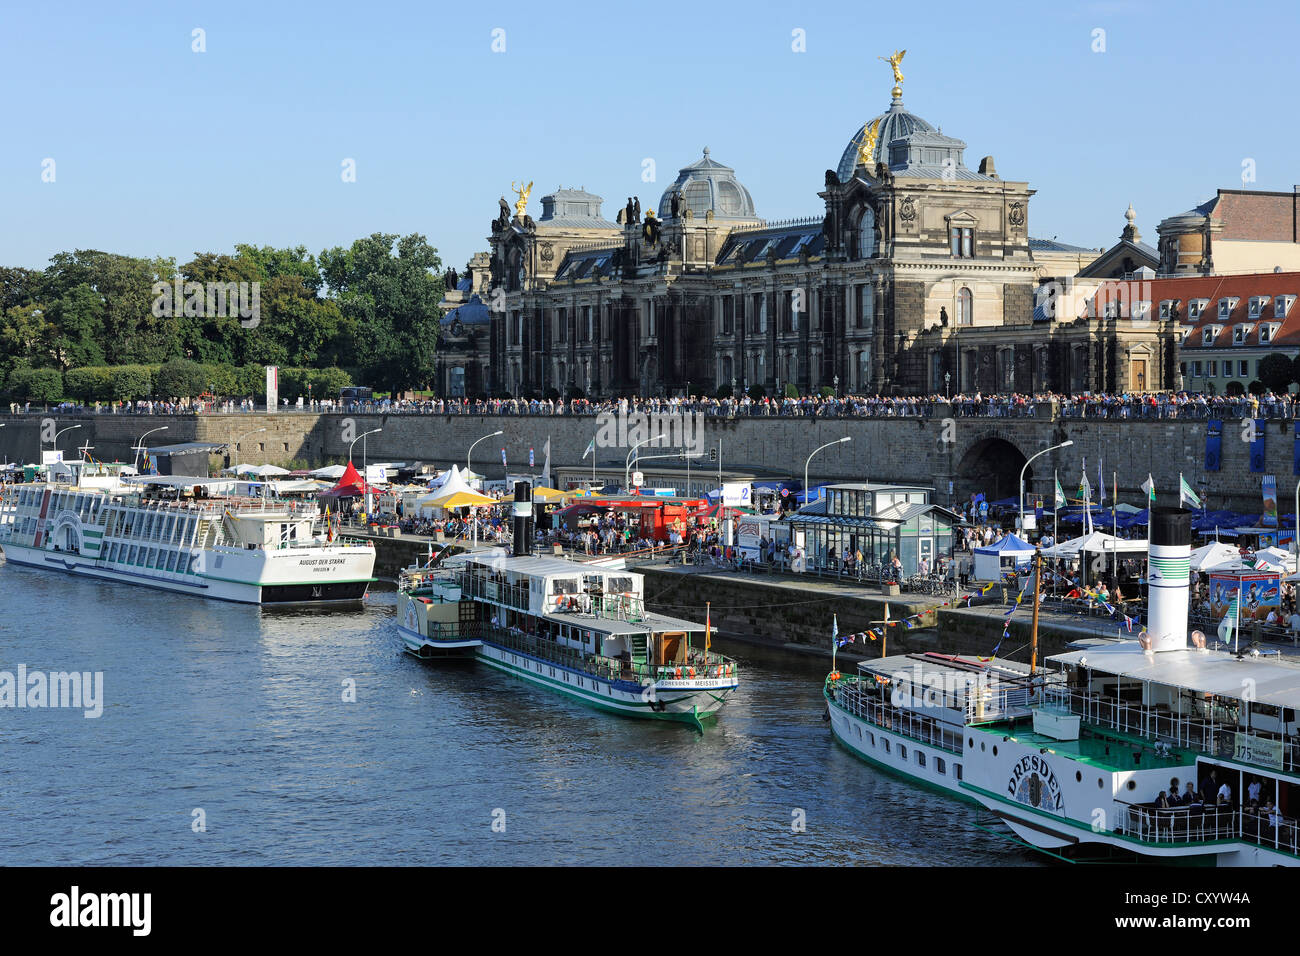 Dresden City Festival, Terrassenufer waterfront and Bruehl's Terrace, Dresden Academy of Fine Arts, Elbe River and boats, Saxony Stock Photo